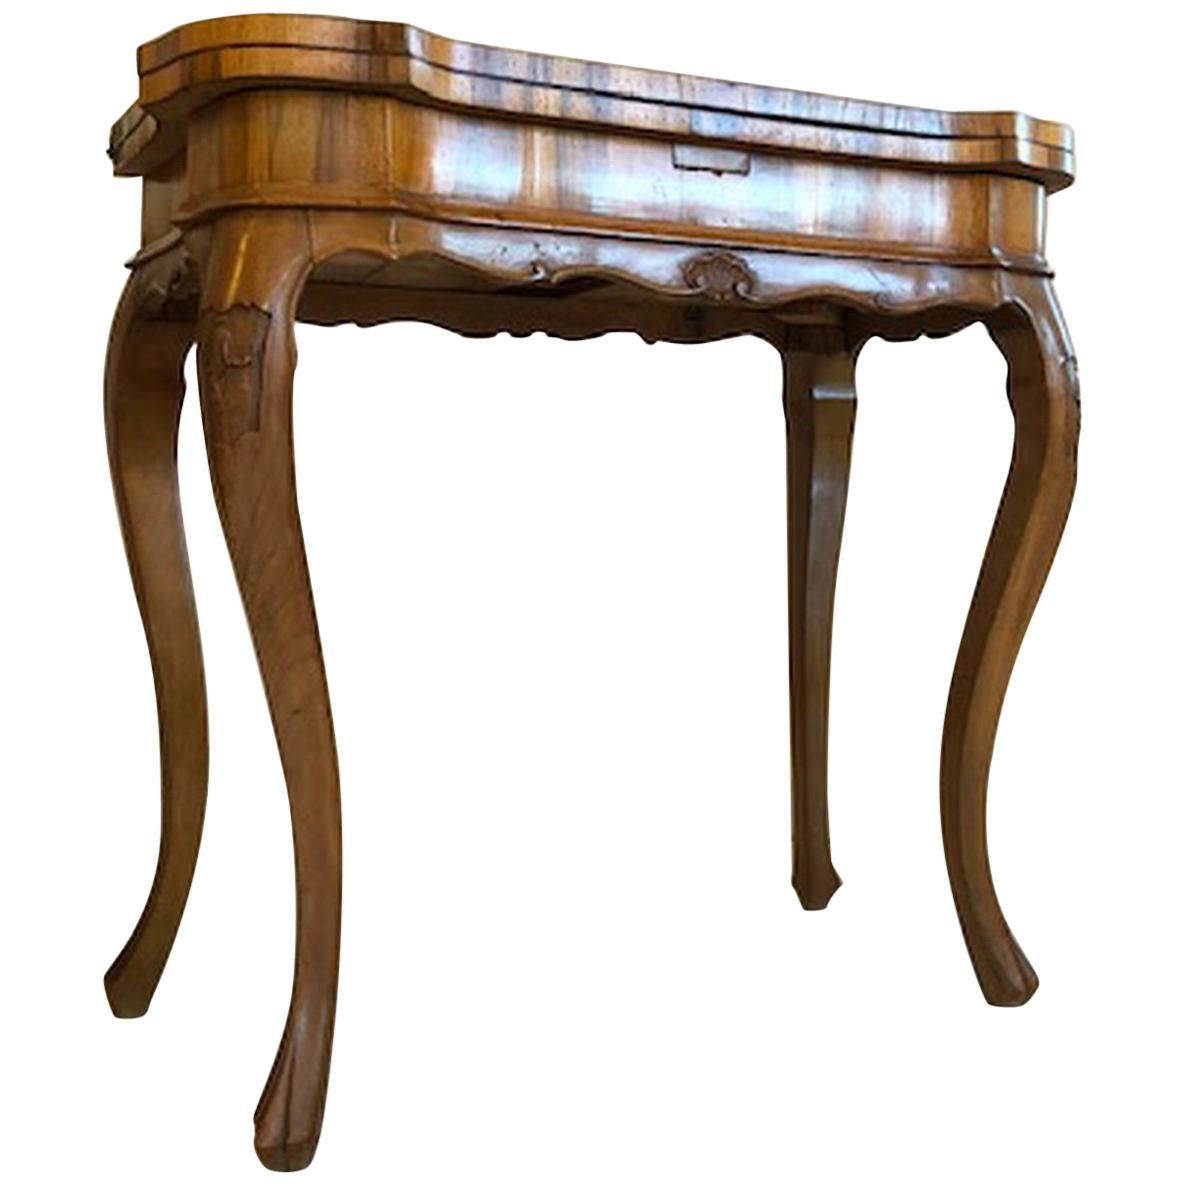 Baroque Style Game Table or Side Table Finely Crafted